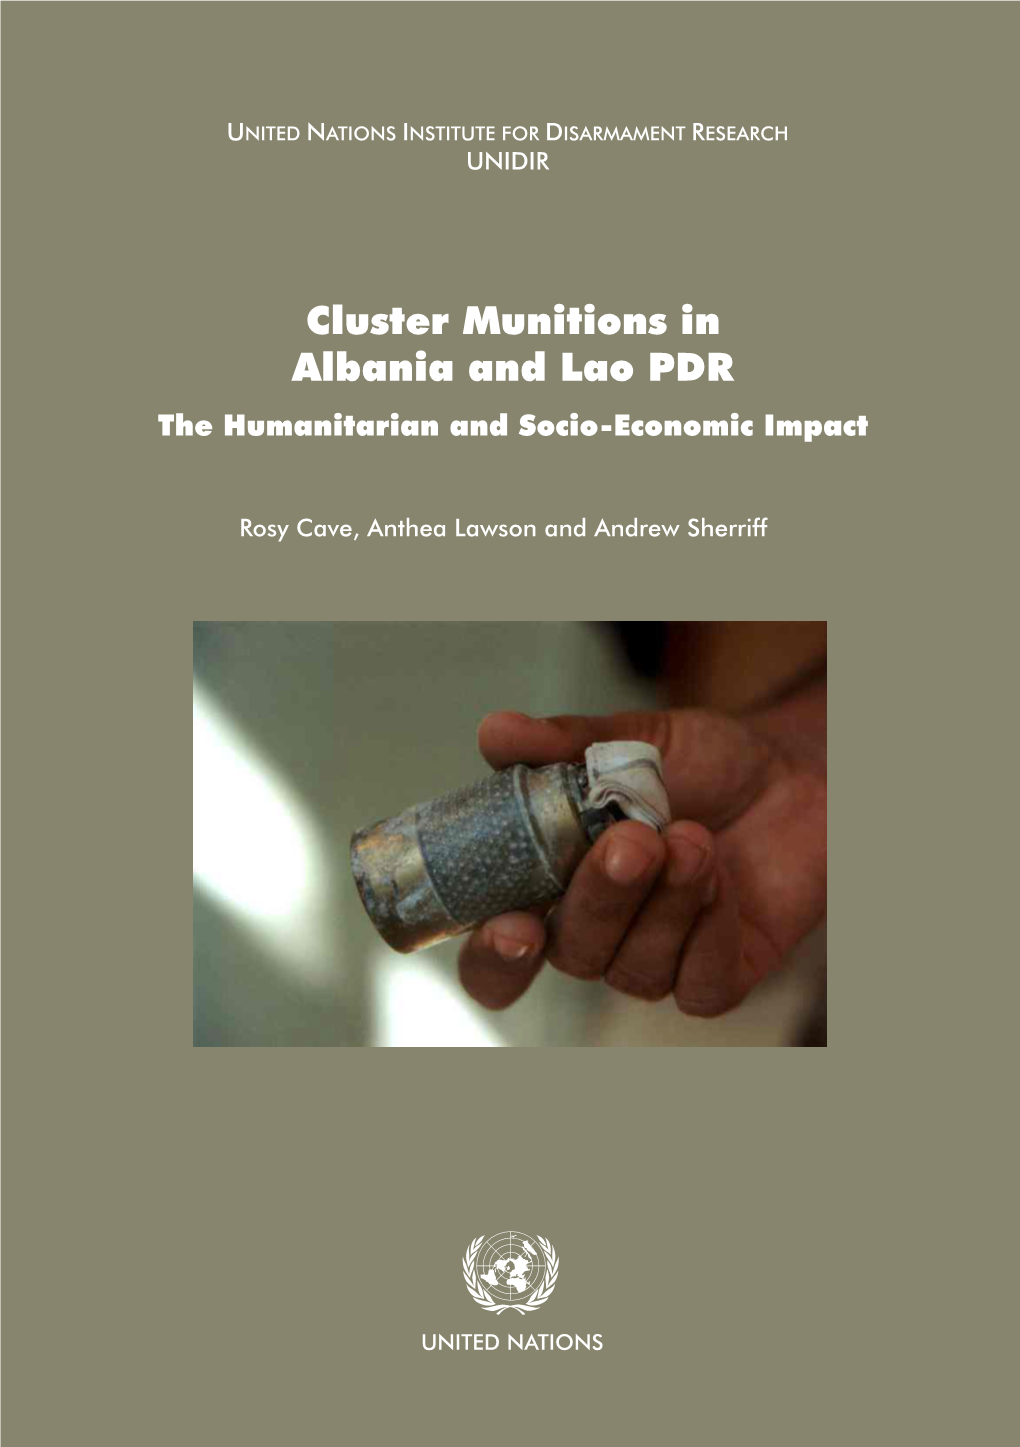 Cluster Munitions in Albania and Lao PDR: the Humanitarian and Socio